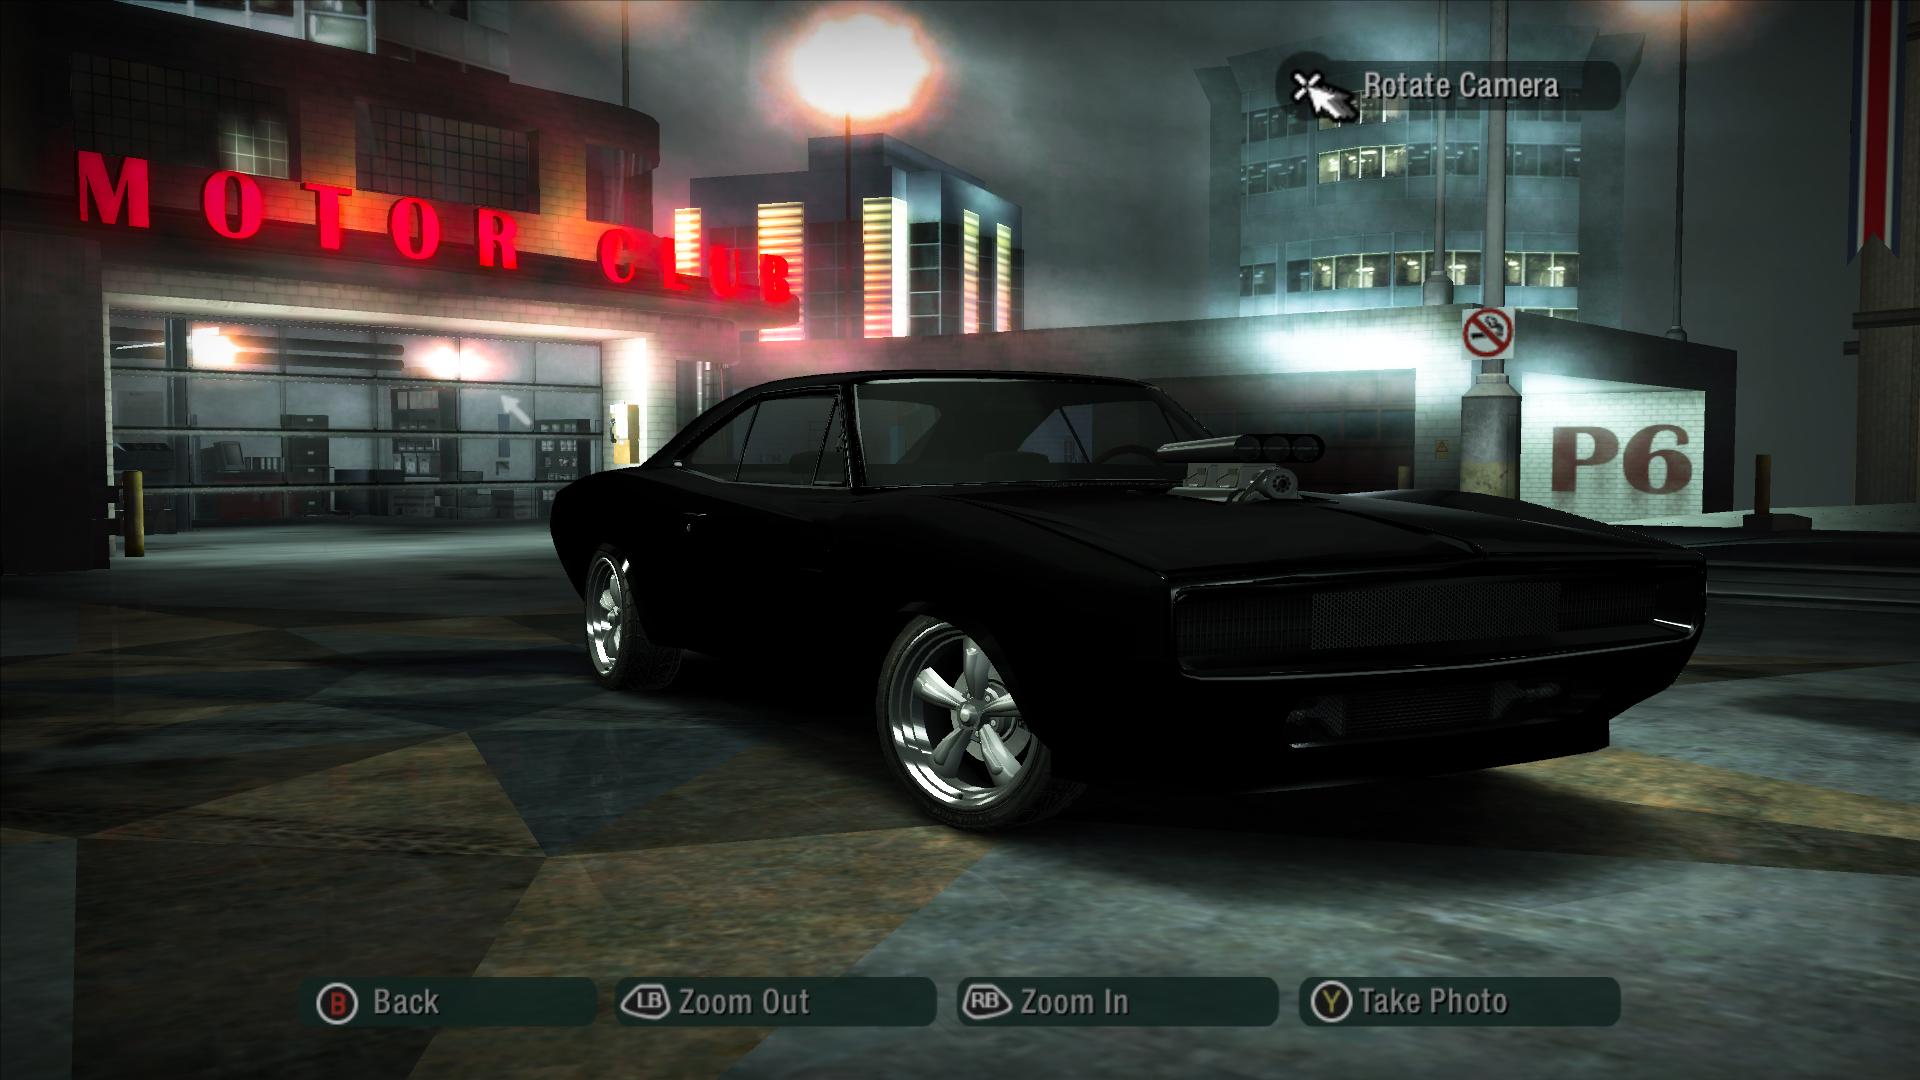 Need For Speed Carbon (dead mod) '69 Charger - Debadge/Dechrome